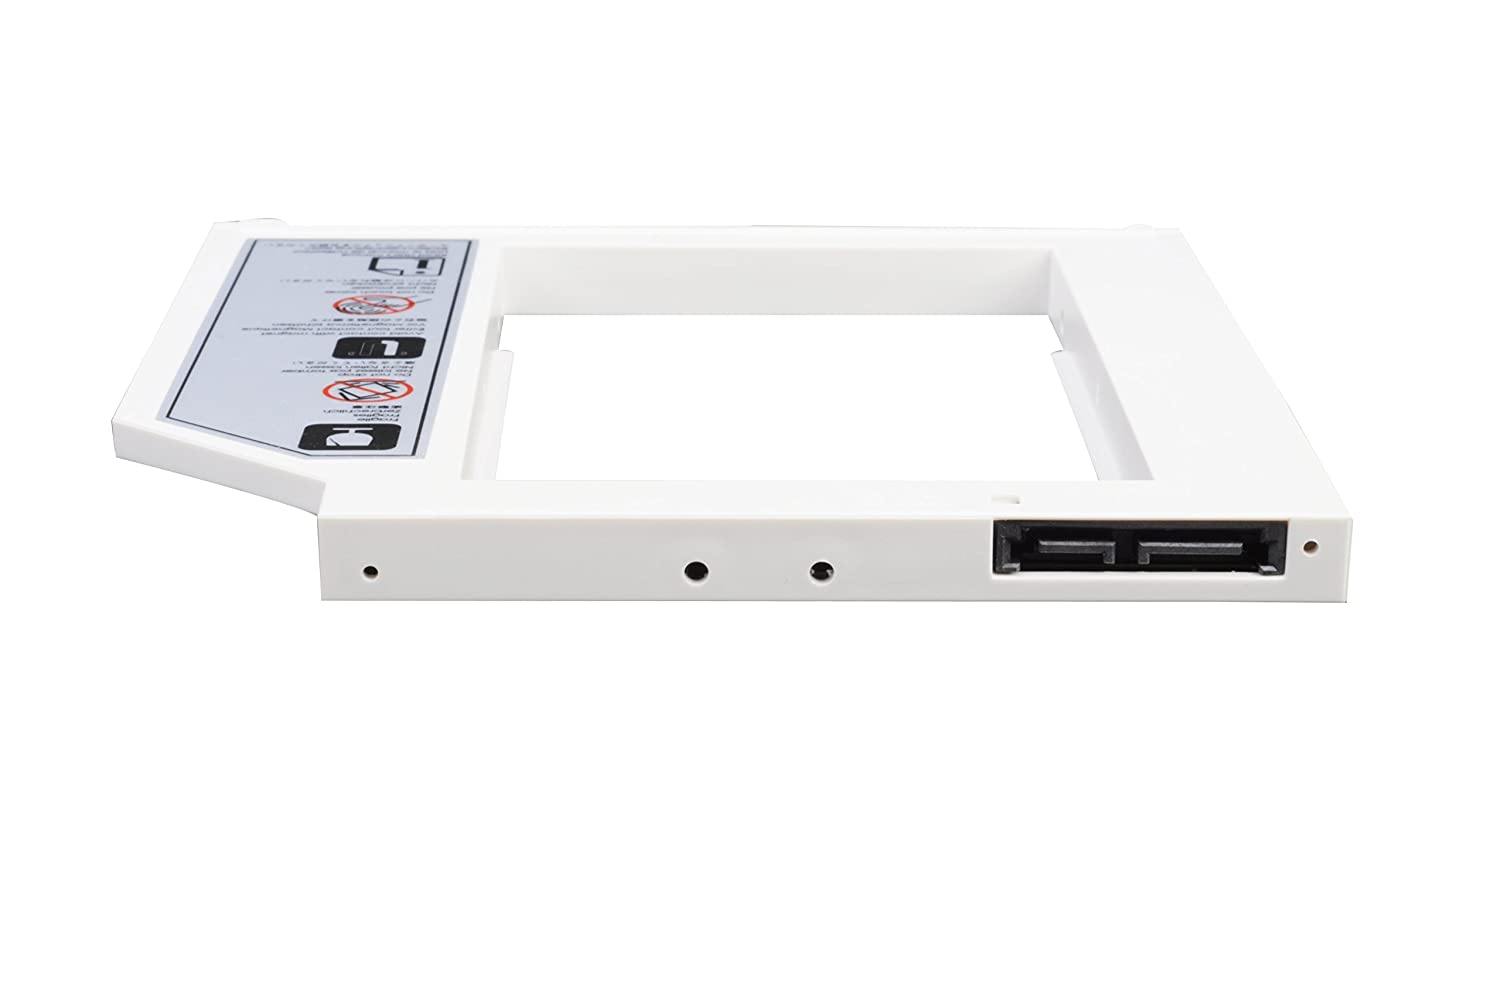 SilverStone TS08 Notebook Optical Drive (9.5mm) to 2.5